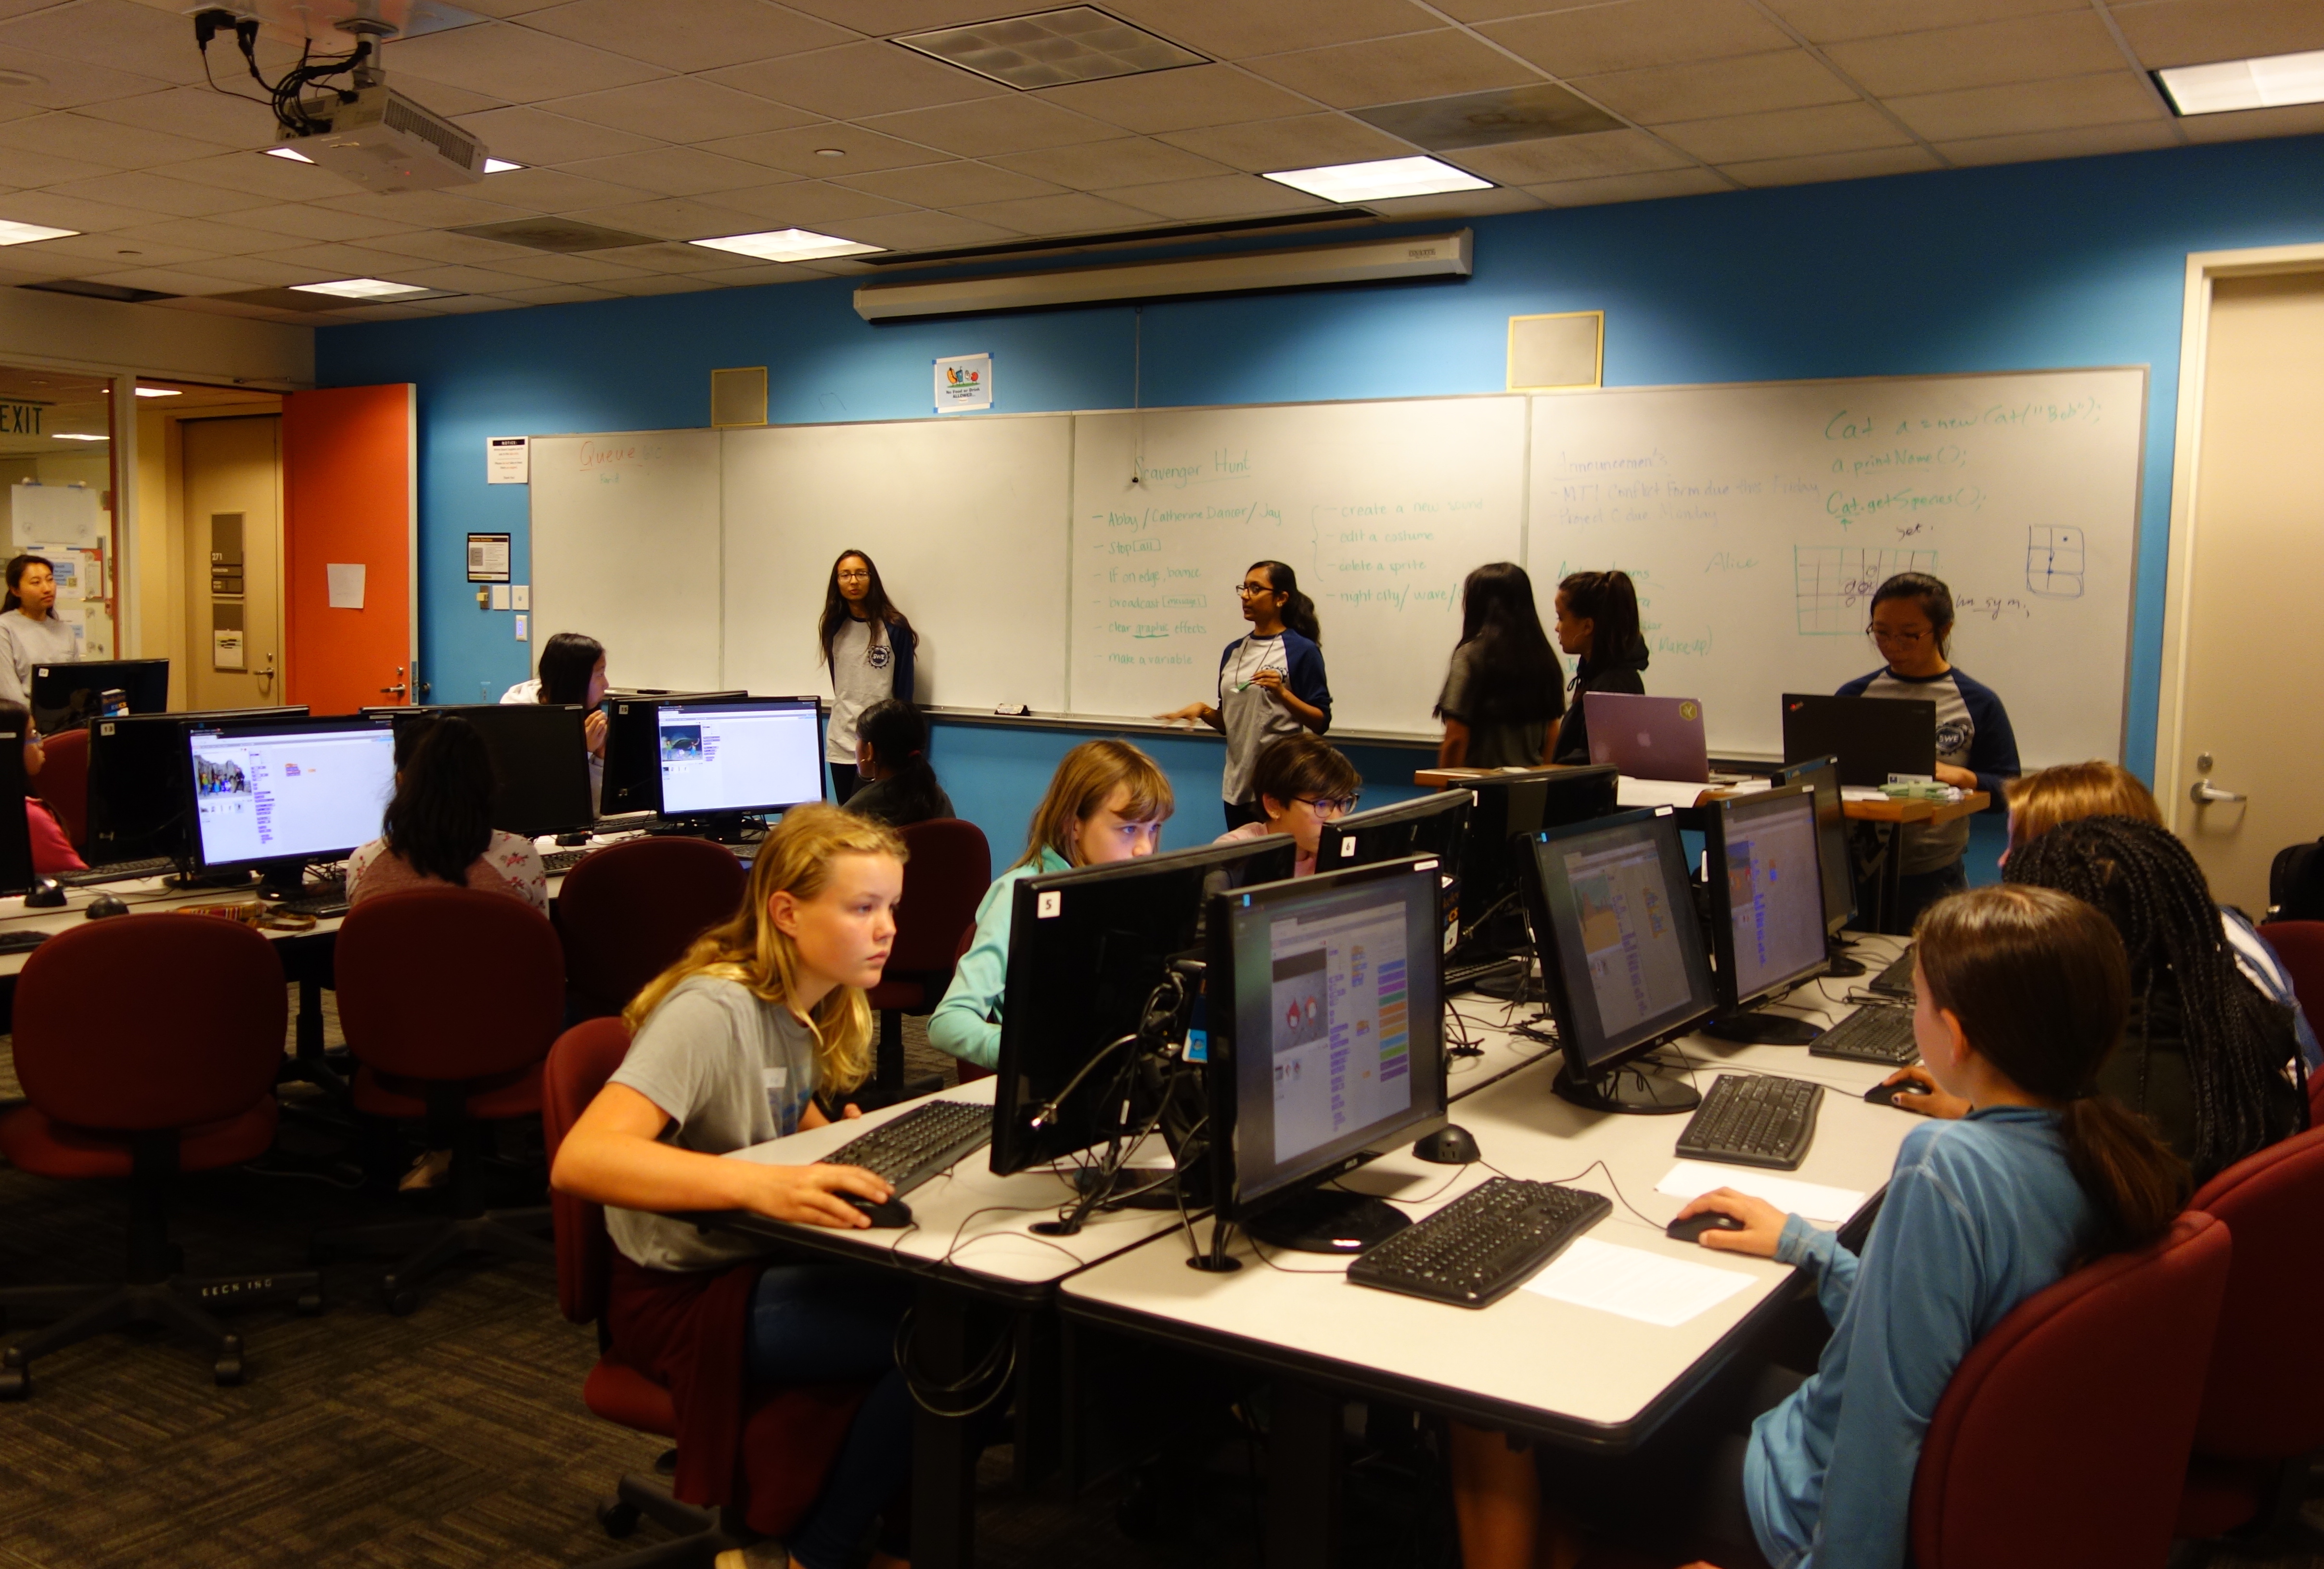 Students working with Scratch in computer science lab.